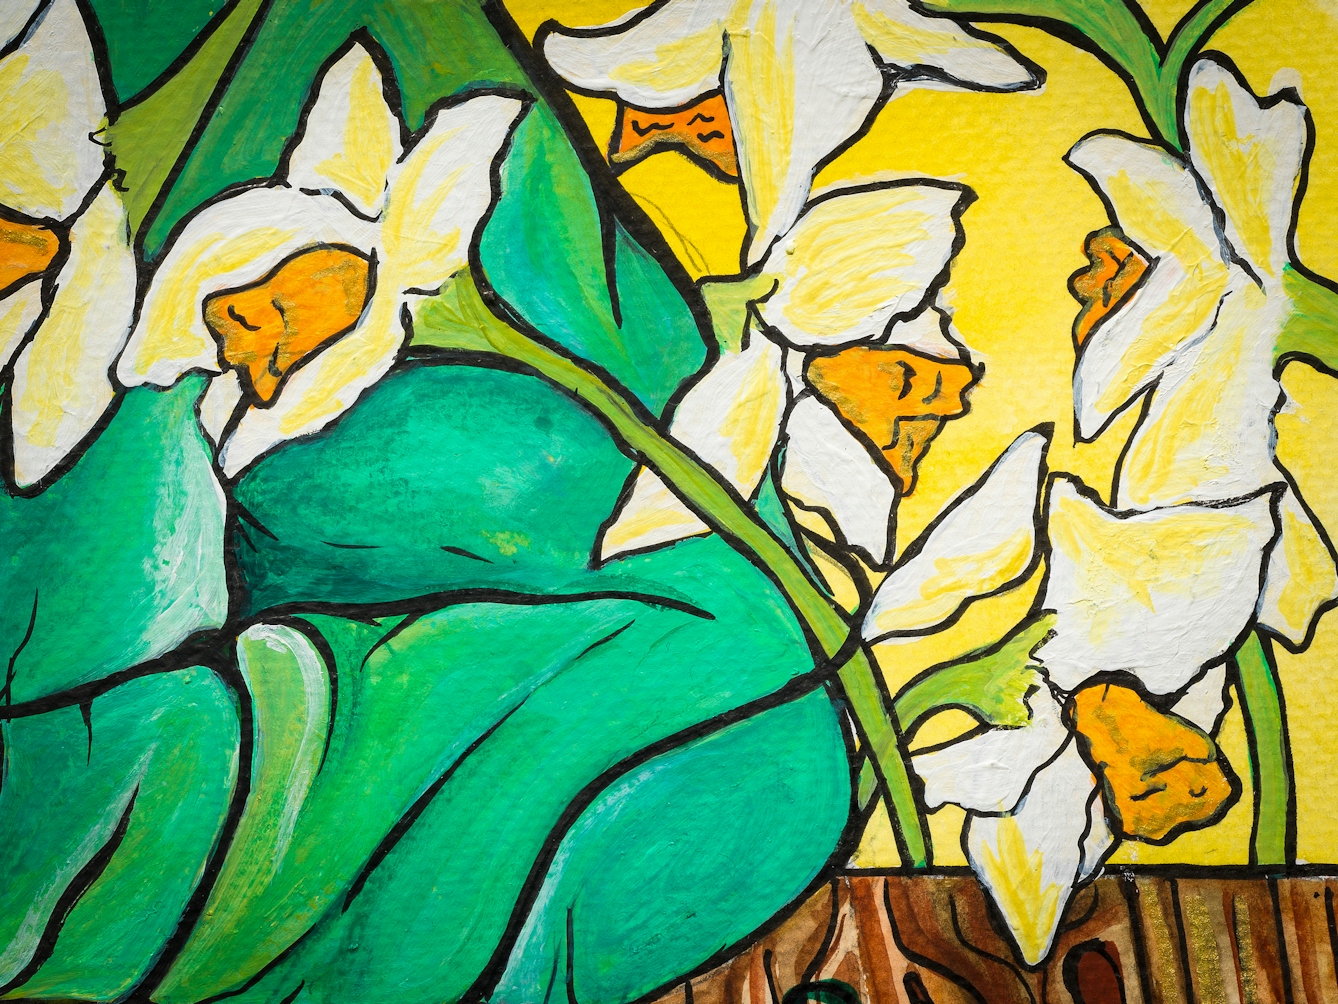 Detail from a larger colourful artwork. The artwork shows daffodils which are growing in front of a yellow wall. To the left of the flowers, a person's arm in a green cardigan rests on a wooden table. 